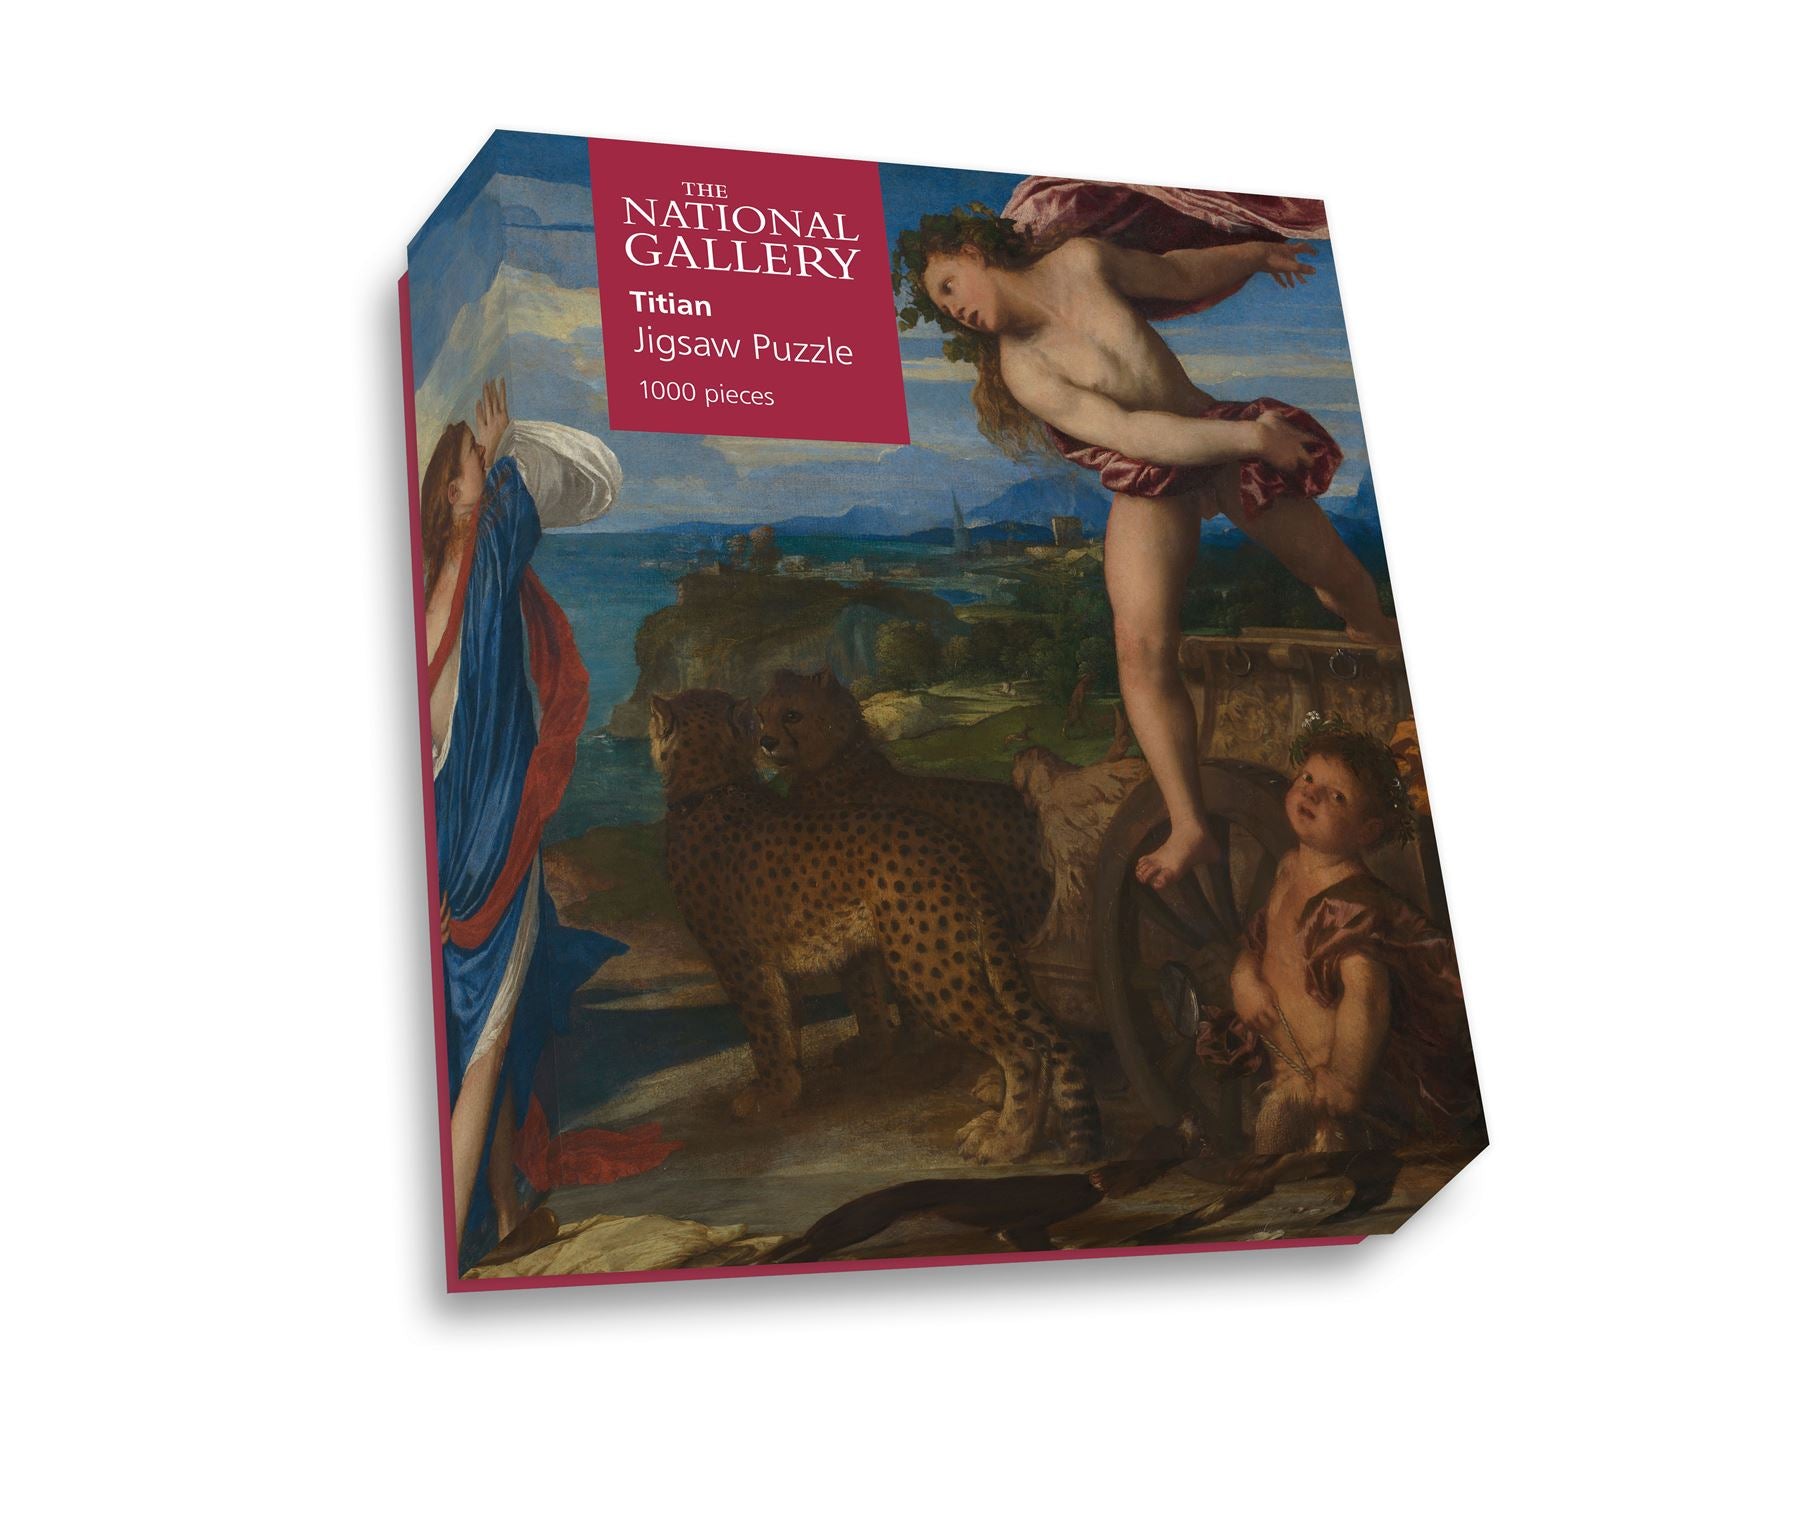 Bacchus and Ariadne - National Gallery 1000 Piece Jigsaw Puzzle box